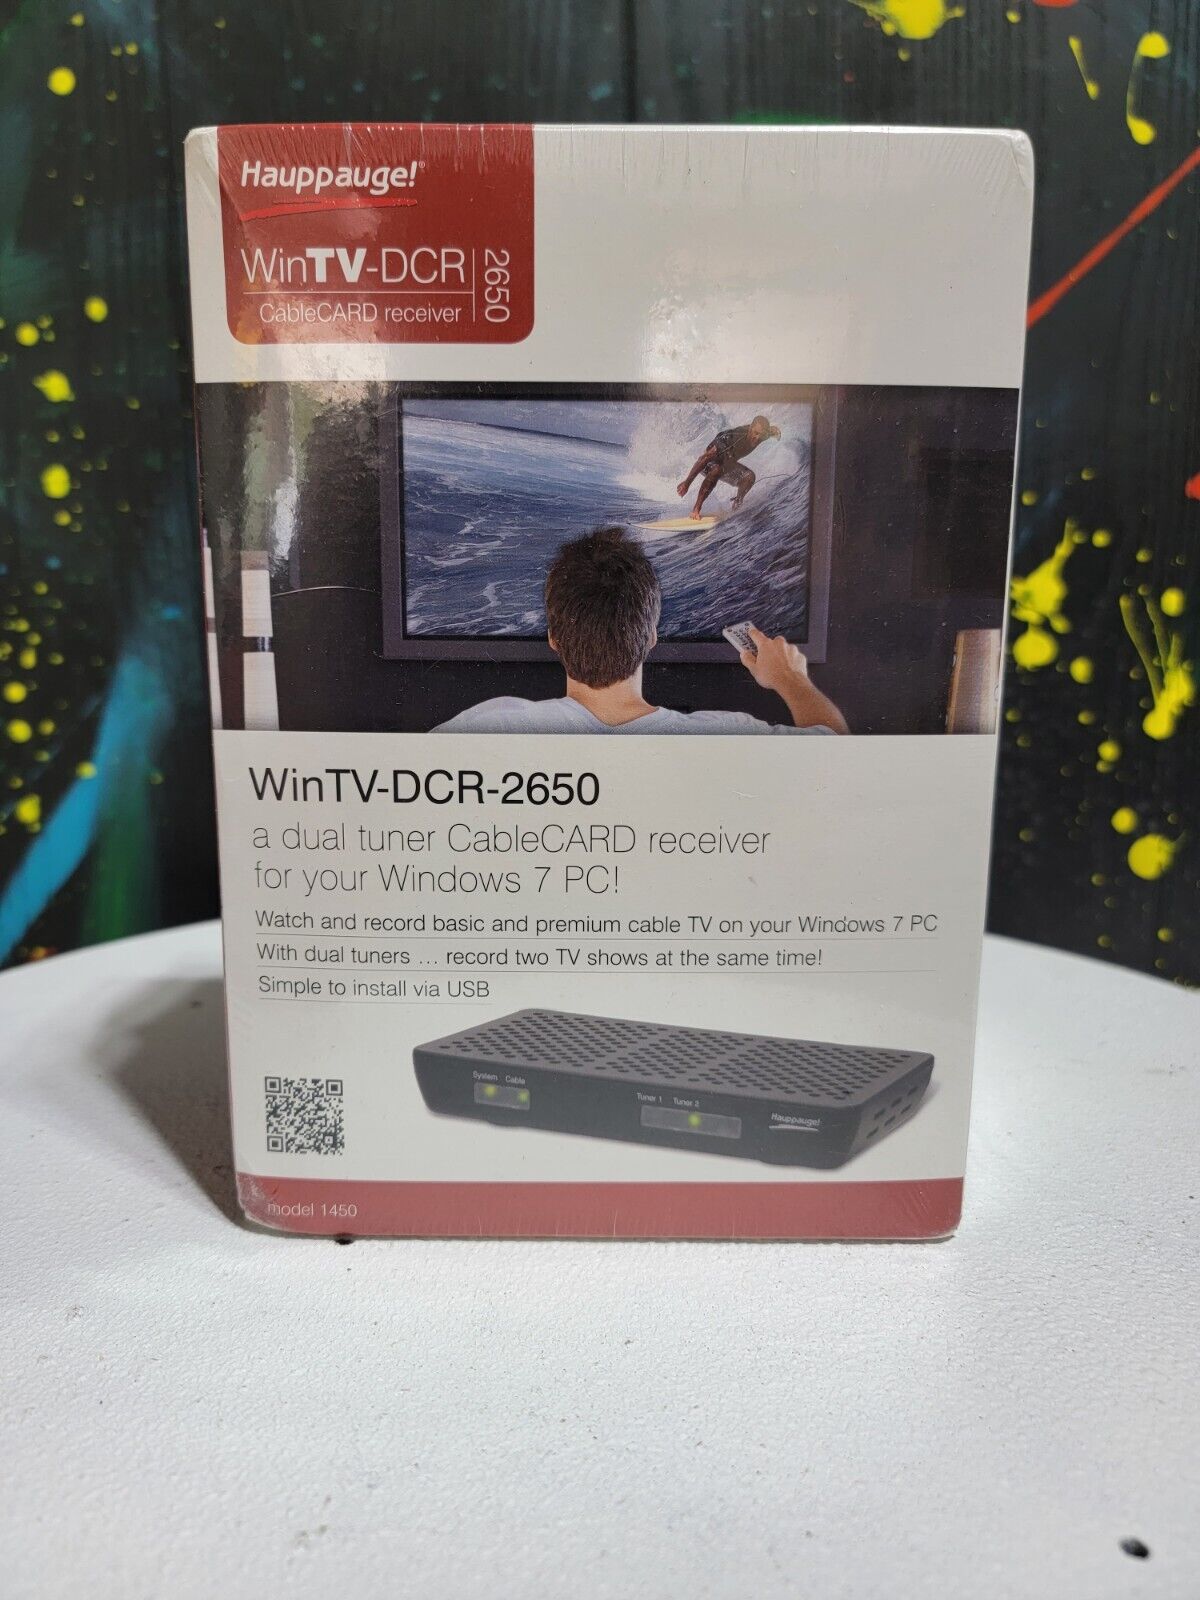 Hauppauge WinTV-DCR-2650 Dual Tuner CableCARD Receiver Sealed